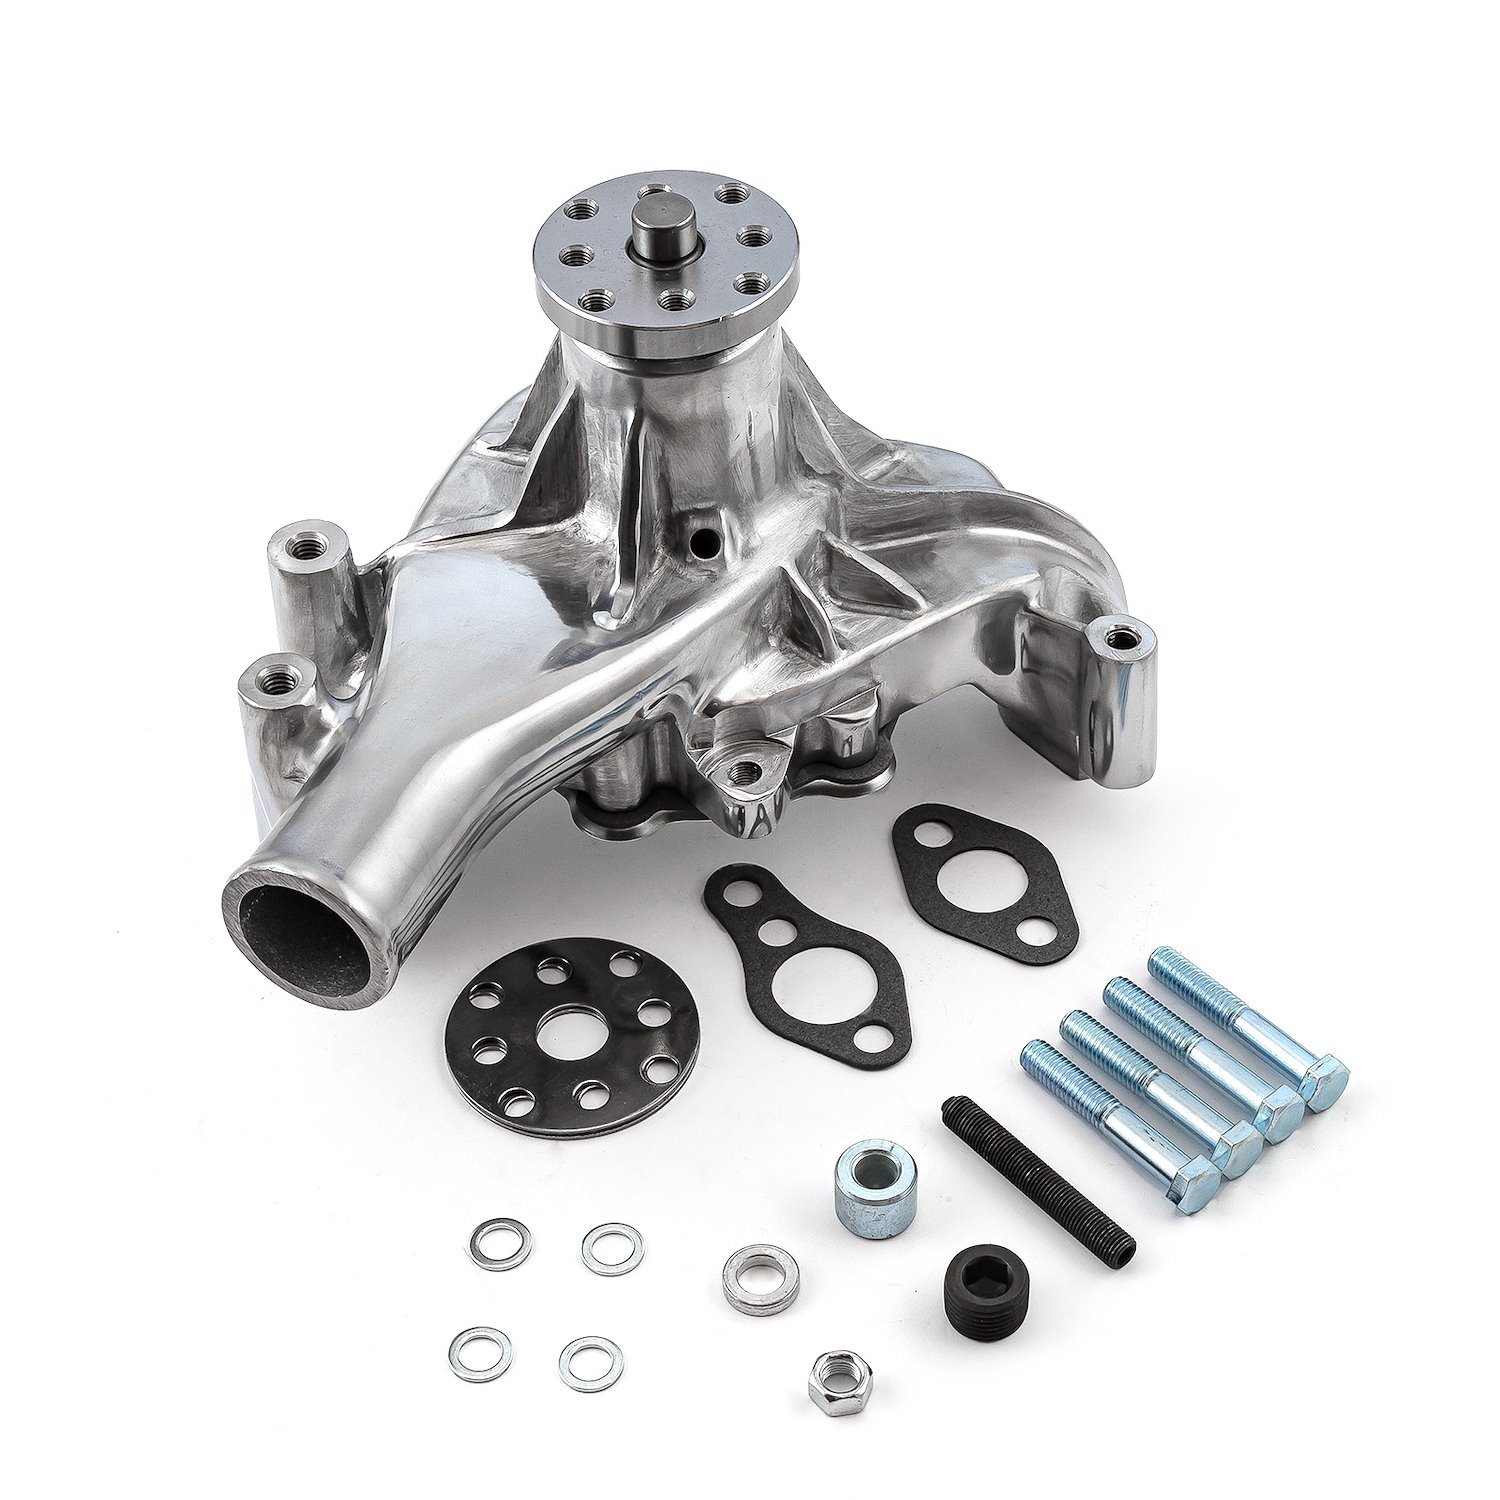 PCE195.1005.03 Long Water Pump, Small Block Chevy 350, High-Volume [Polished]